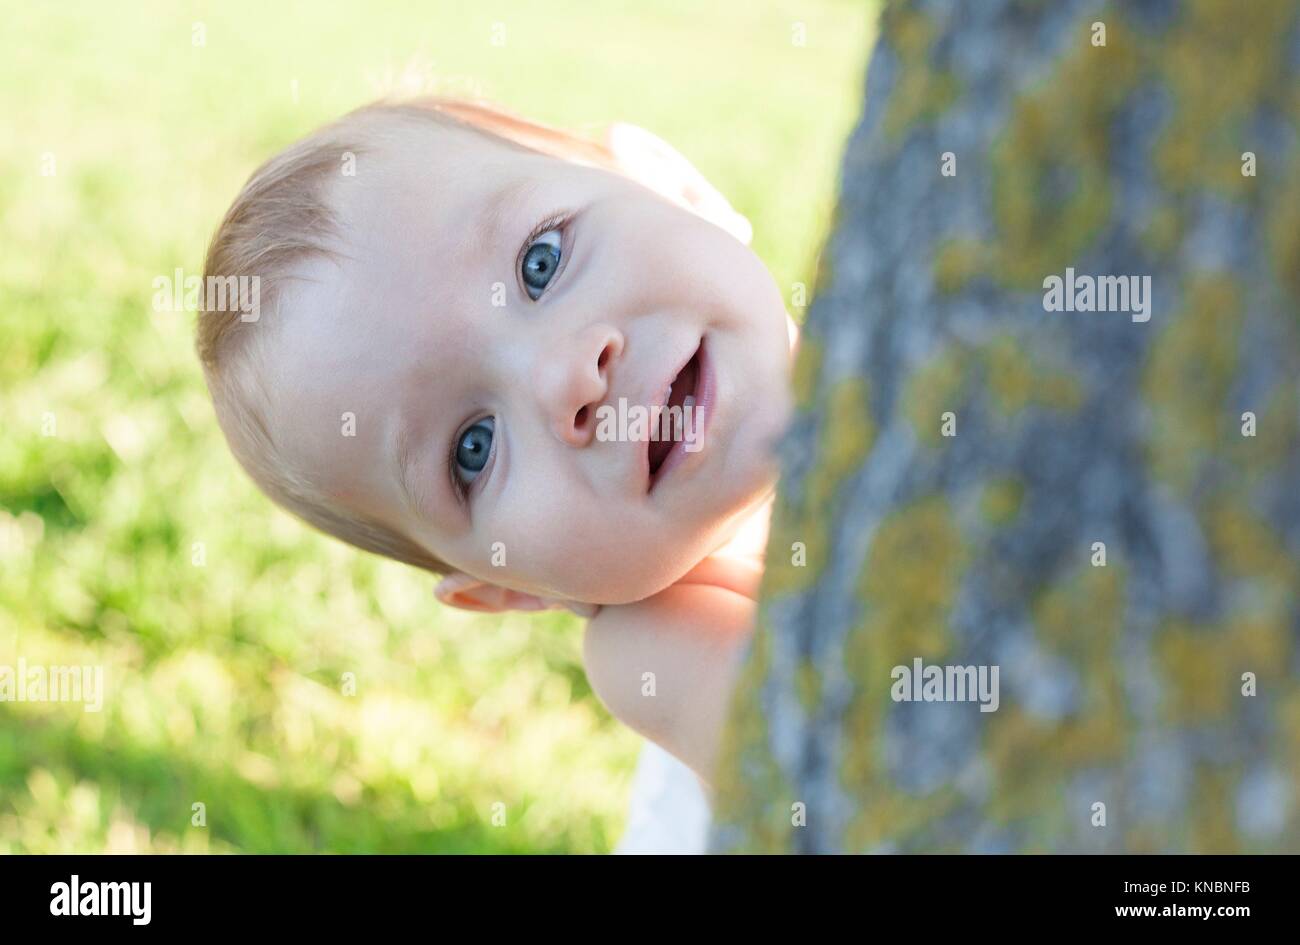 1 year baby boy playing hide-and-seek on swimming pool grass. Baby development concept. Stock Photo